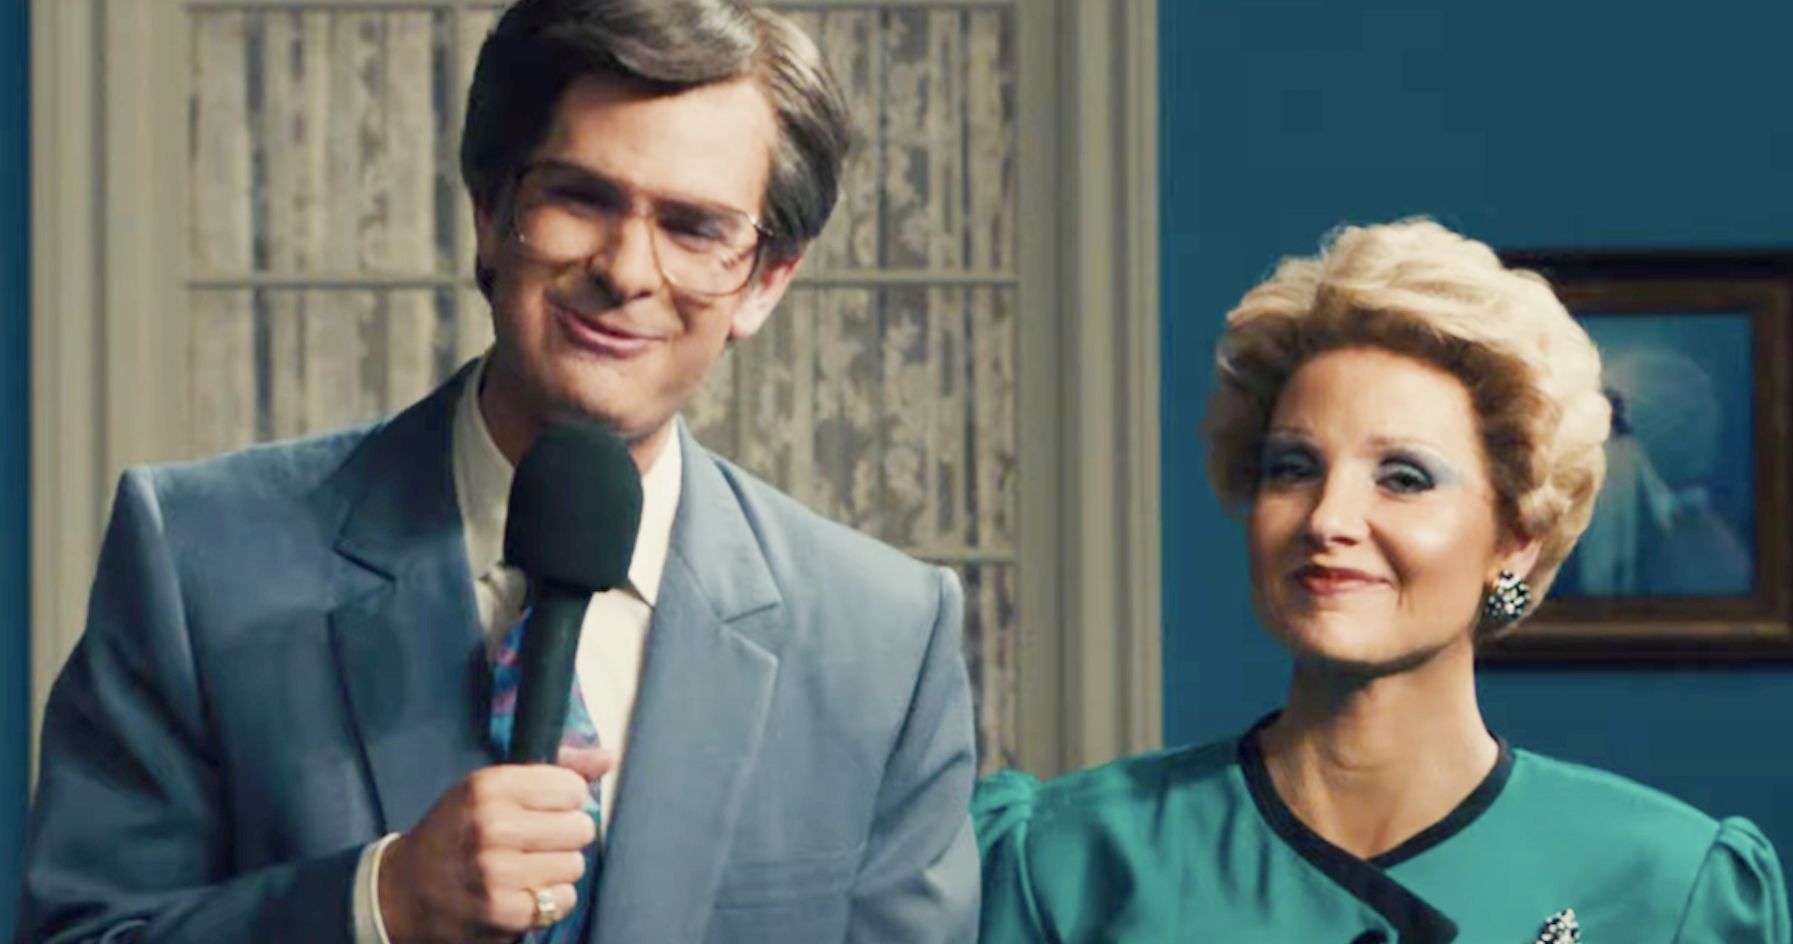 The Eyes of Tammy Faye Trailer Transforms Jessica Chastain Into the Infamous Televangelist